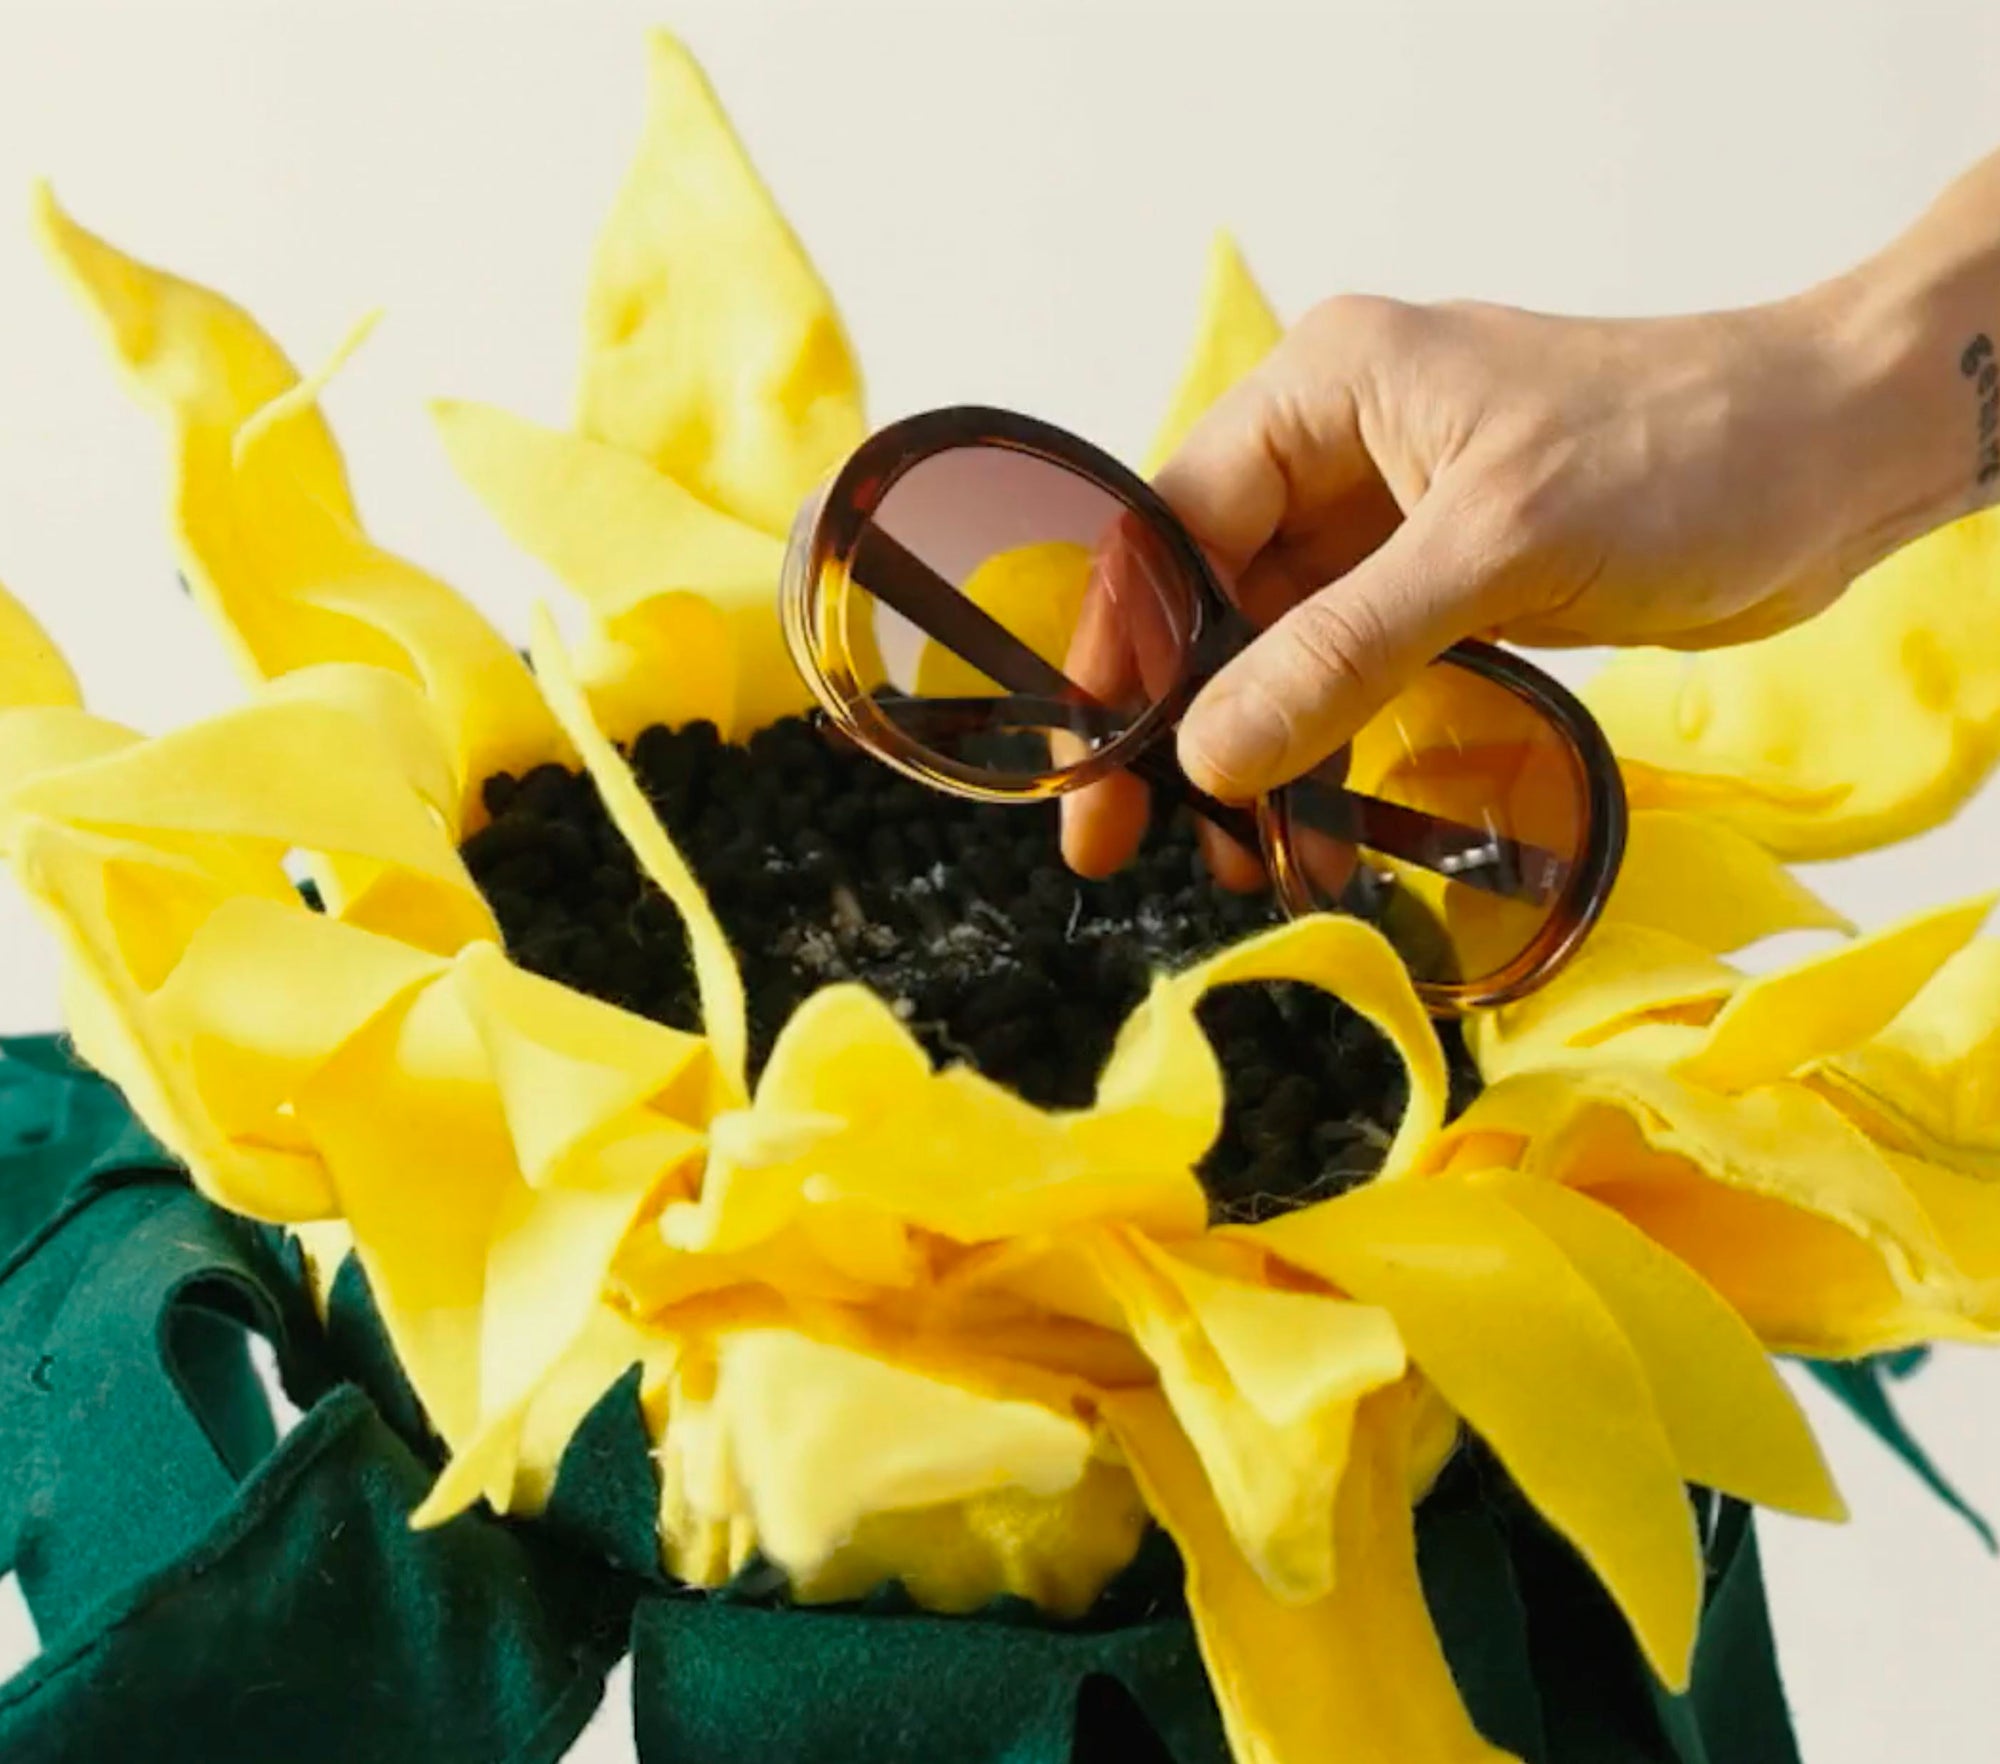 Sunglasses made from plants